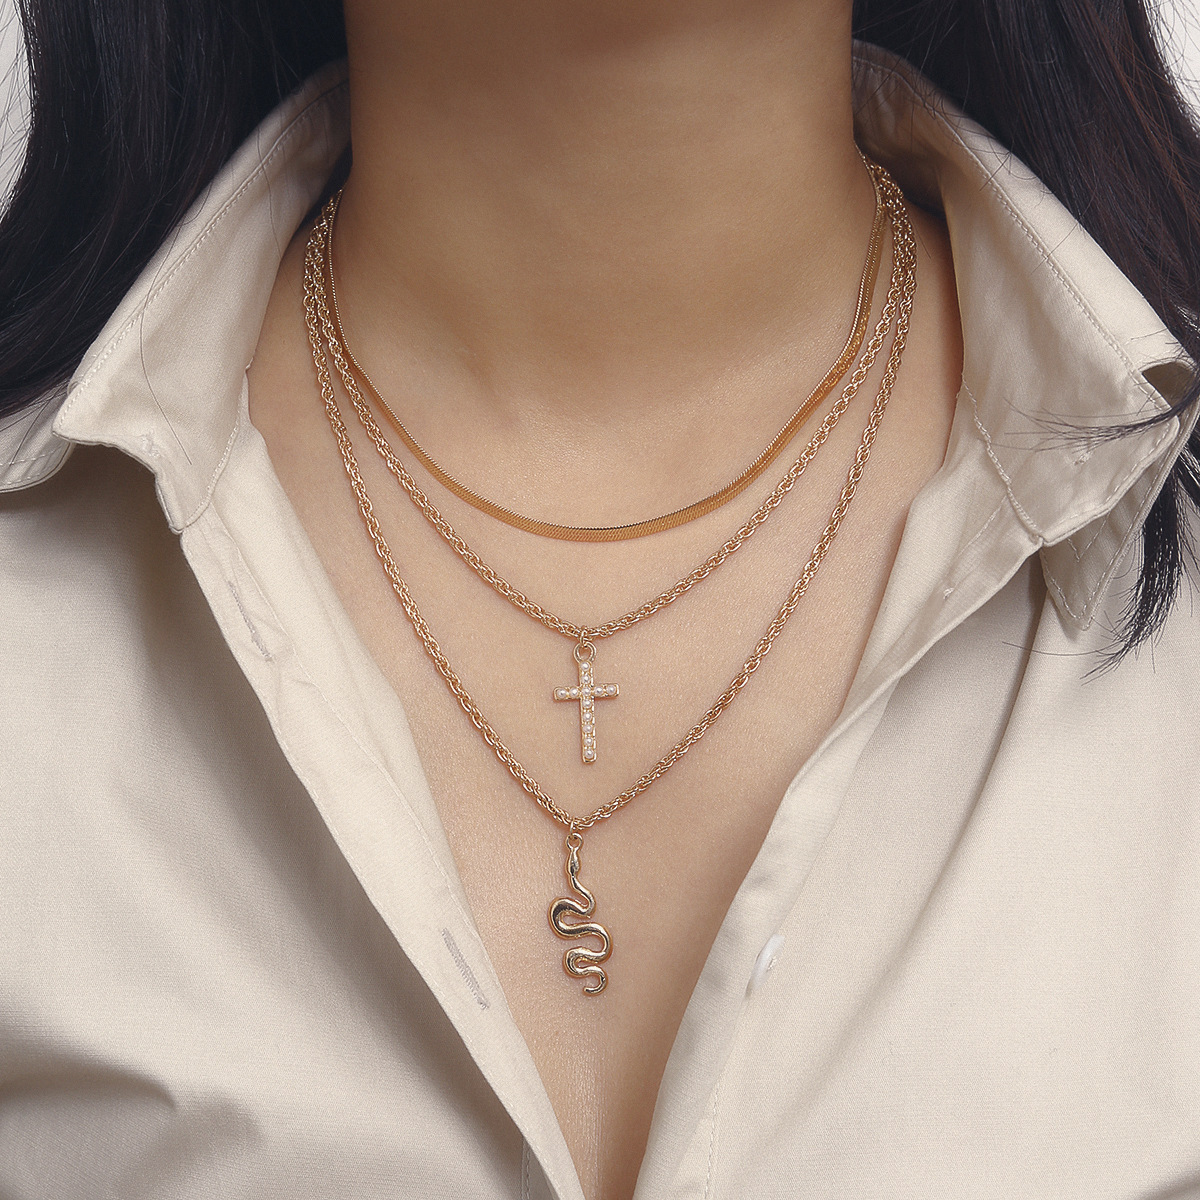 Jewelry Micro Inlaid Imitation Pearl Cross Necklace Female Twisted Snake Shape Personality Multilayer Pendant Necklace